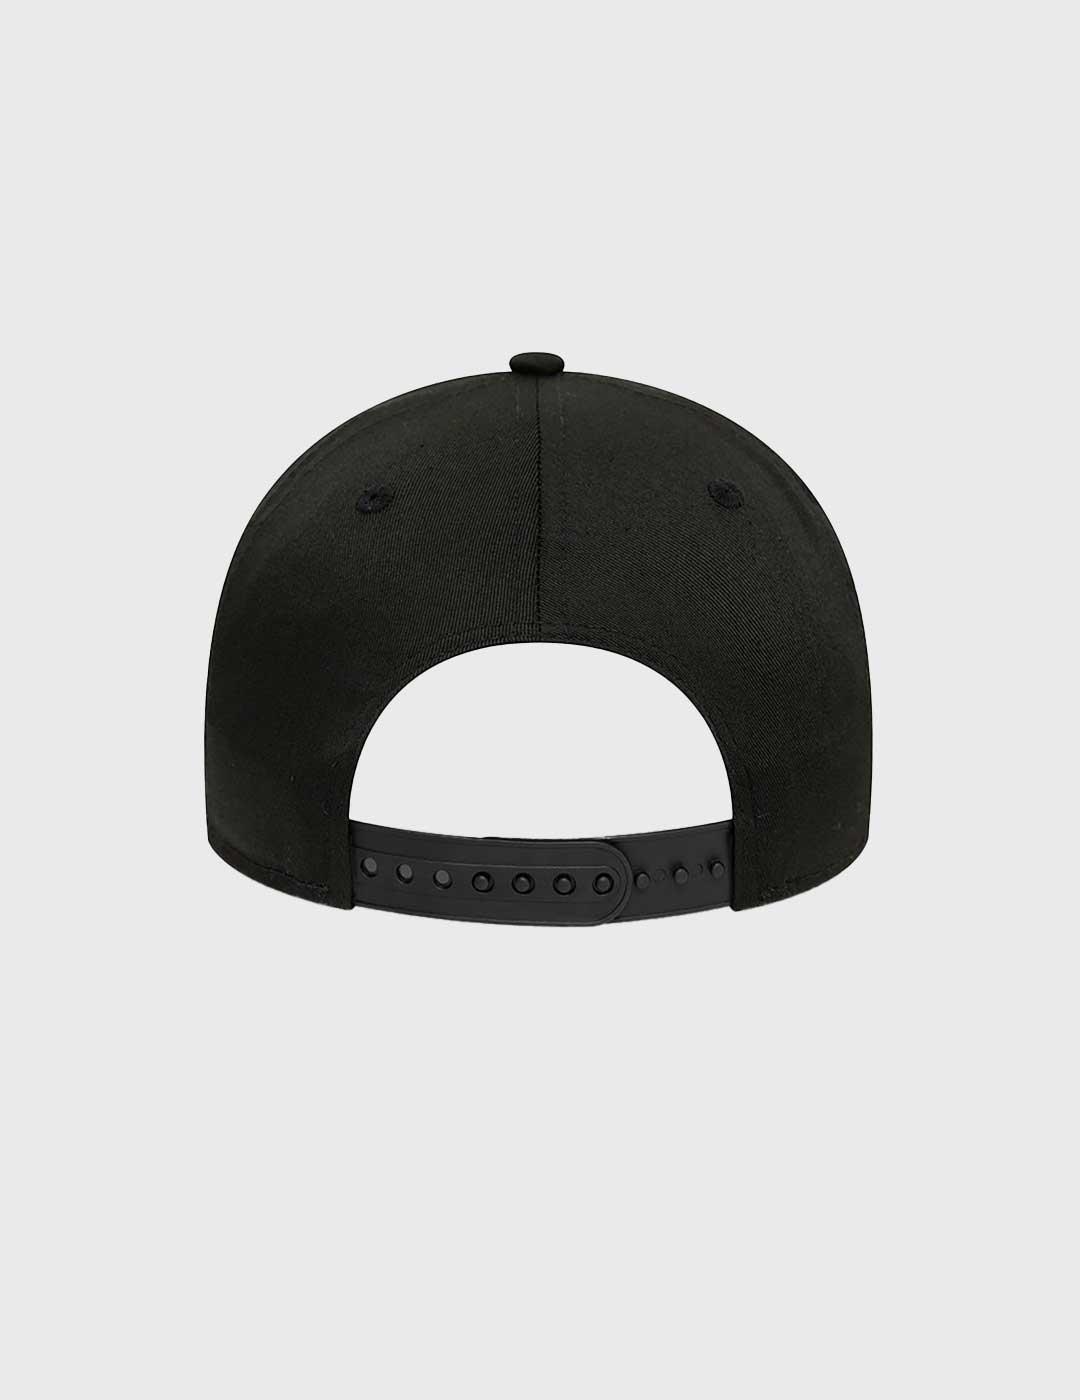 Gorra New Era Patch 9Forty negra para hombre y mujer